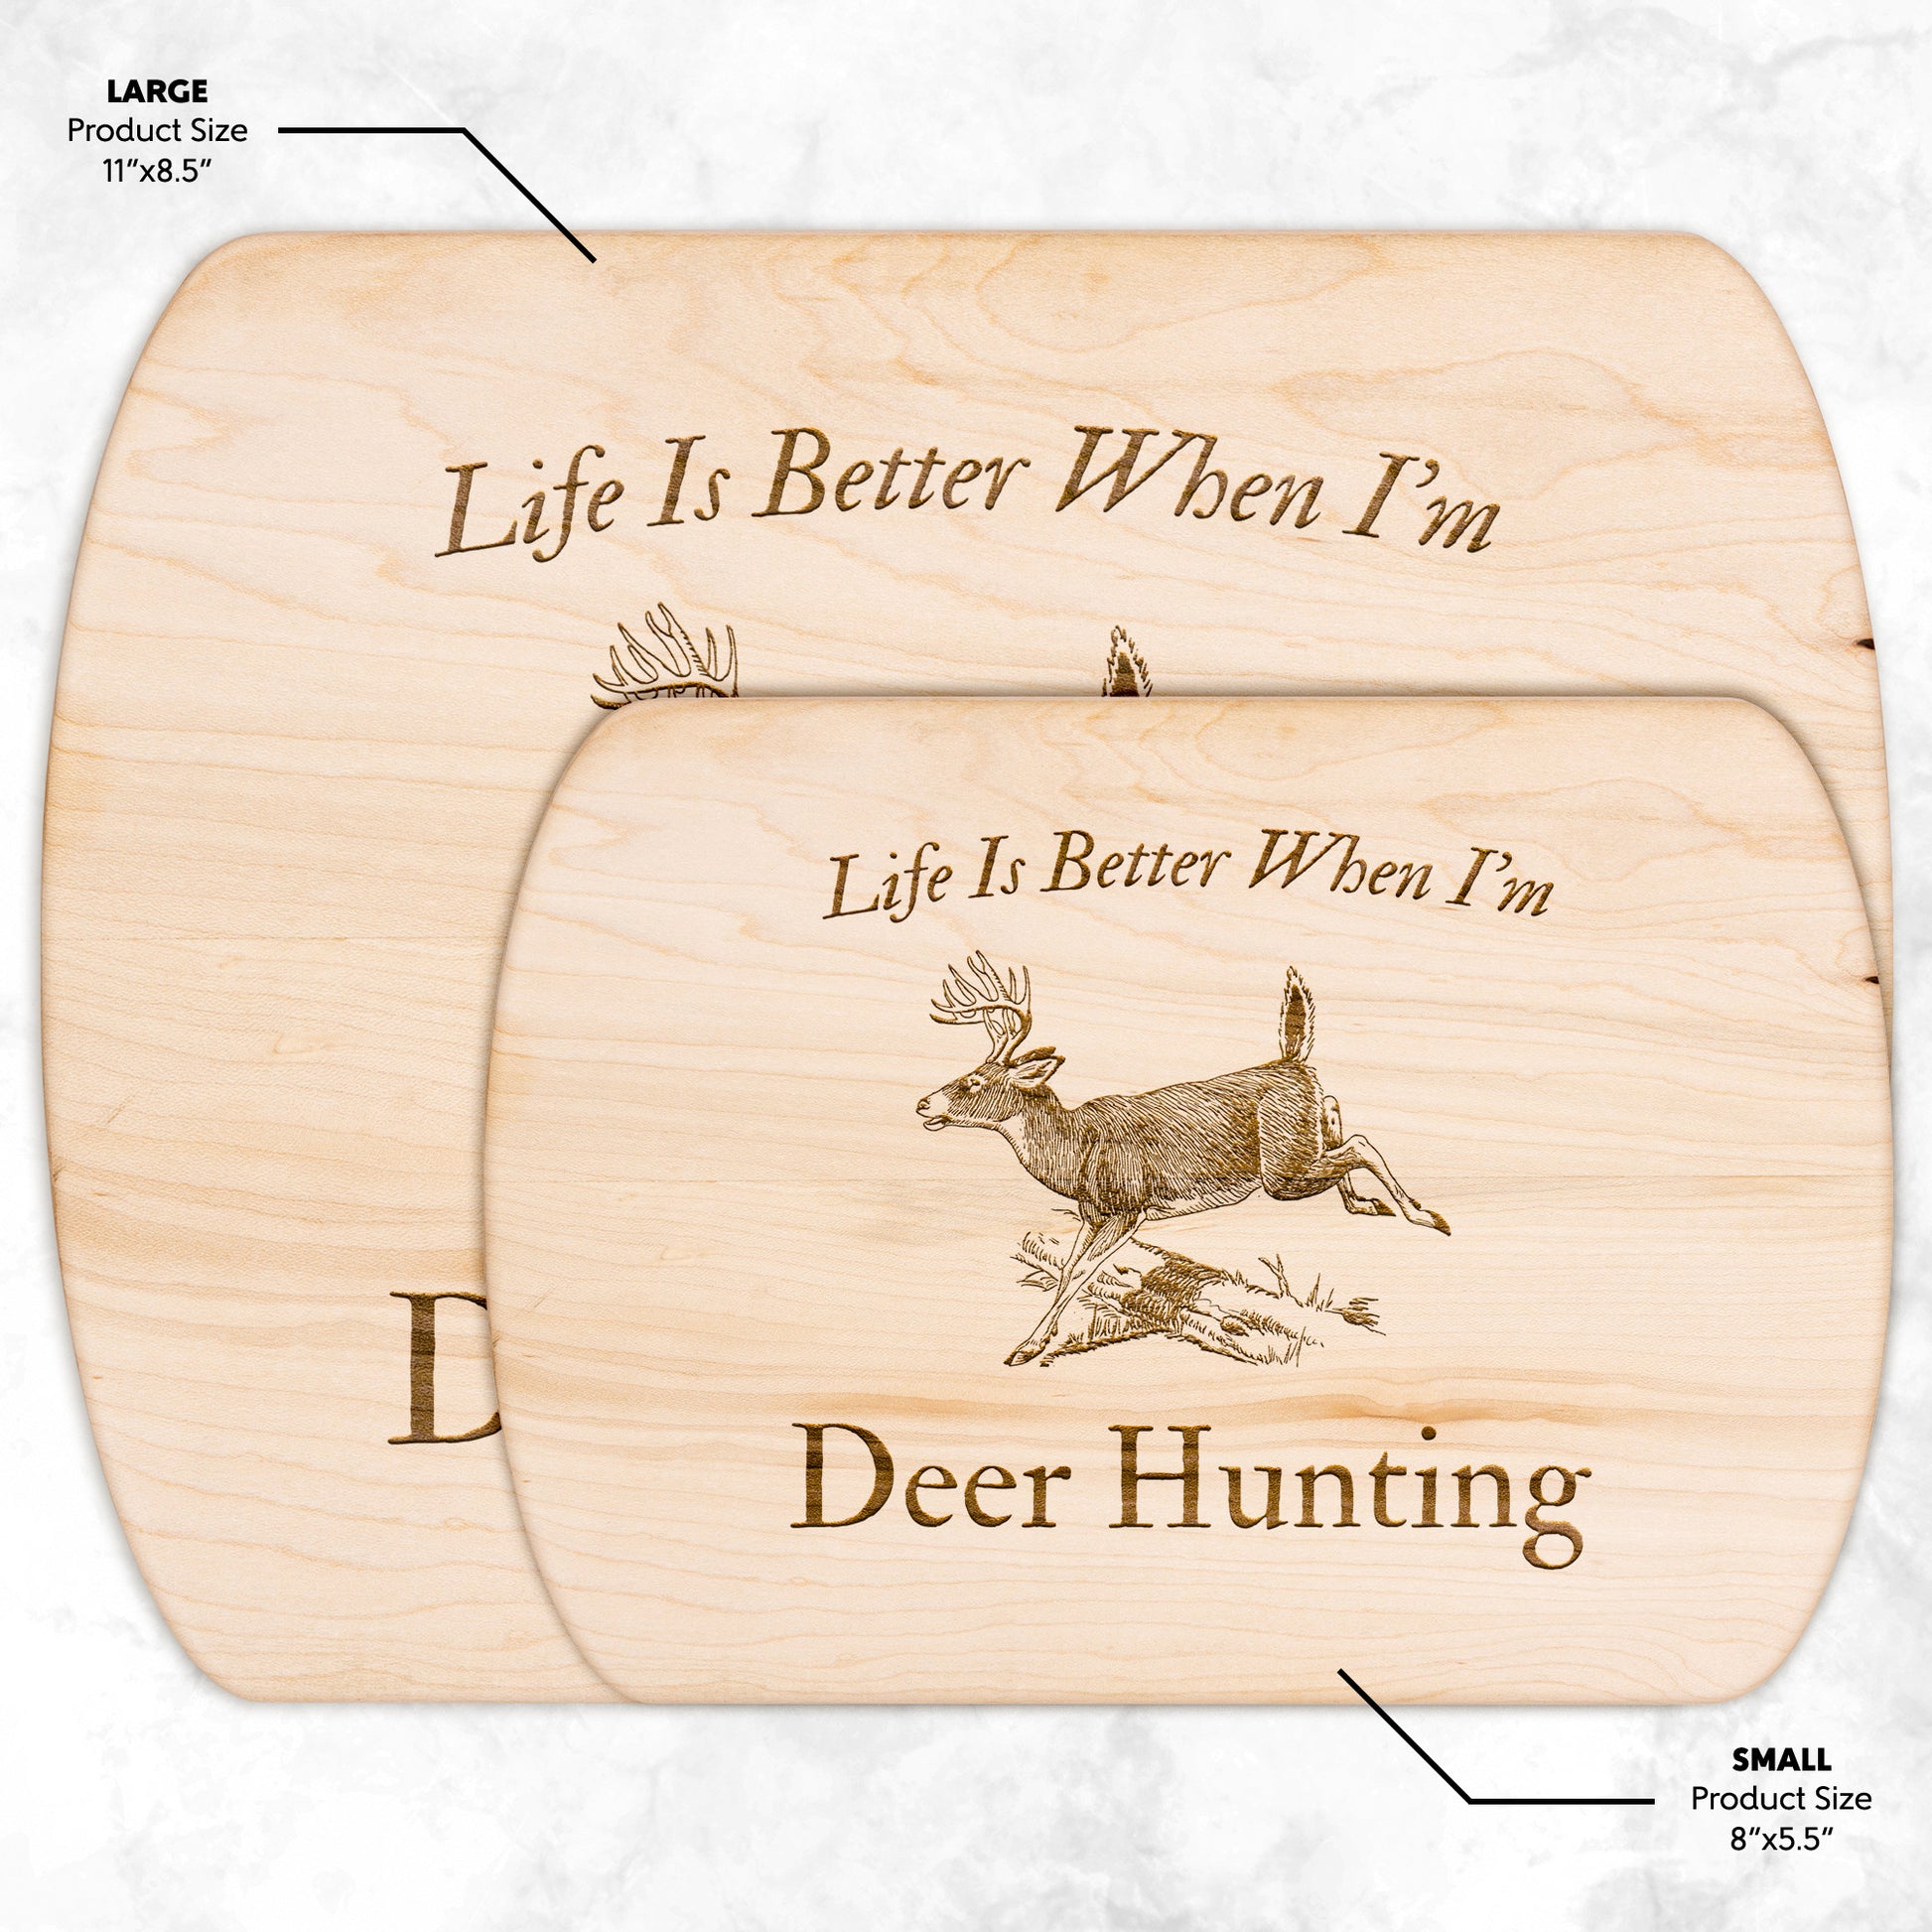 Two sizes available in hardwood cutting boards with outdoor hunting design.